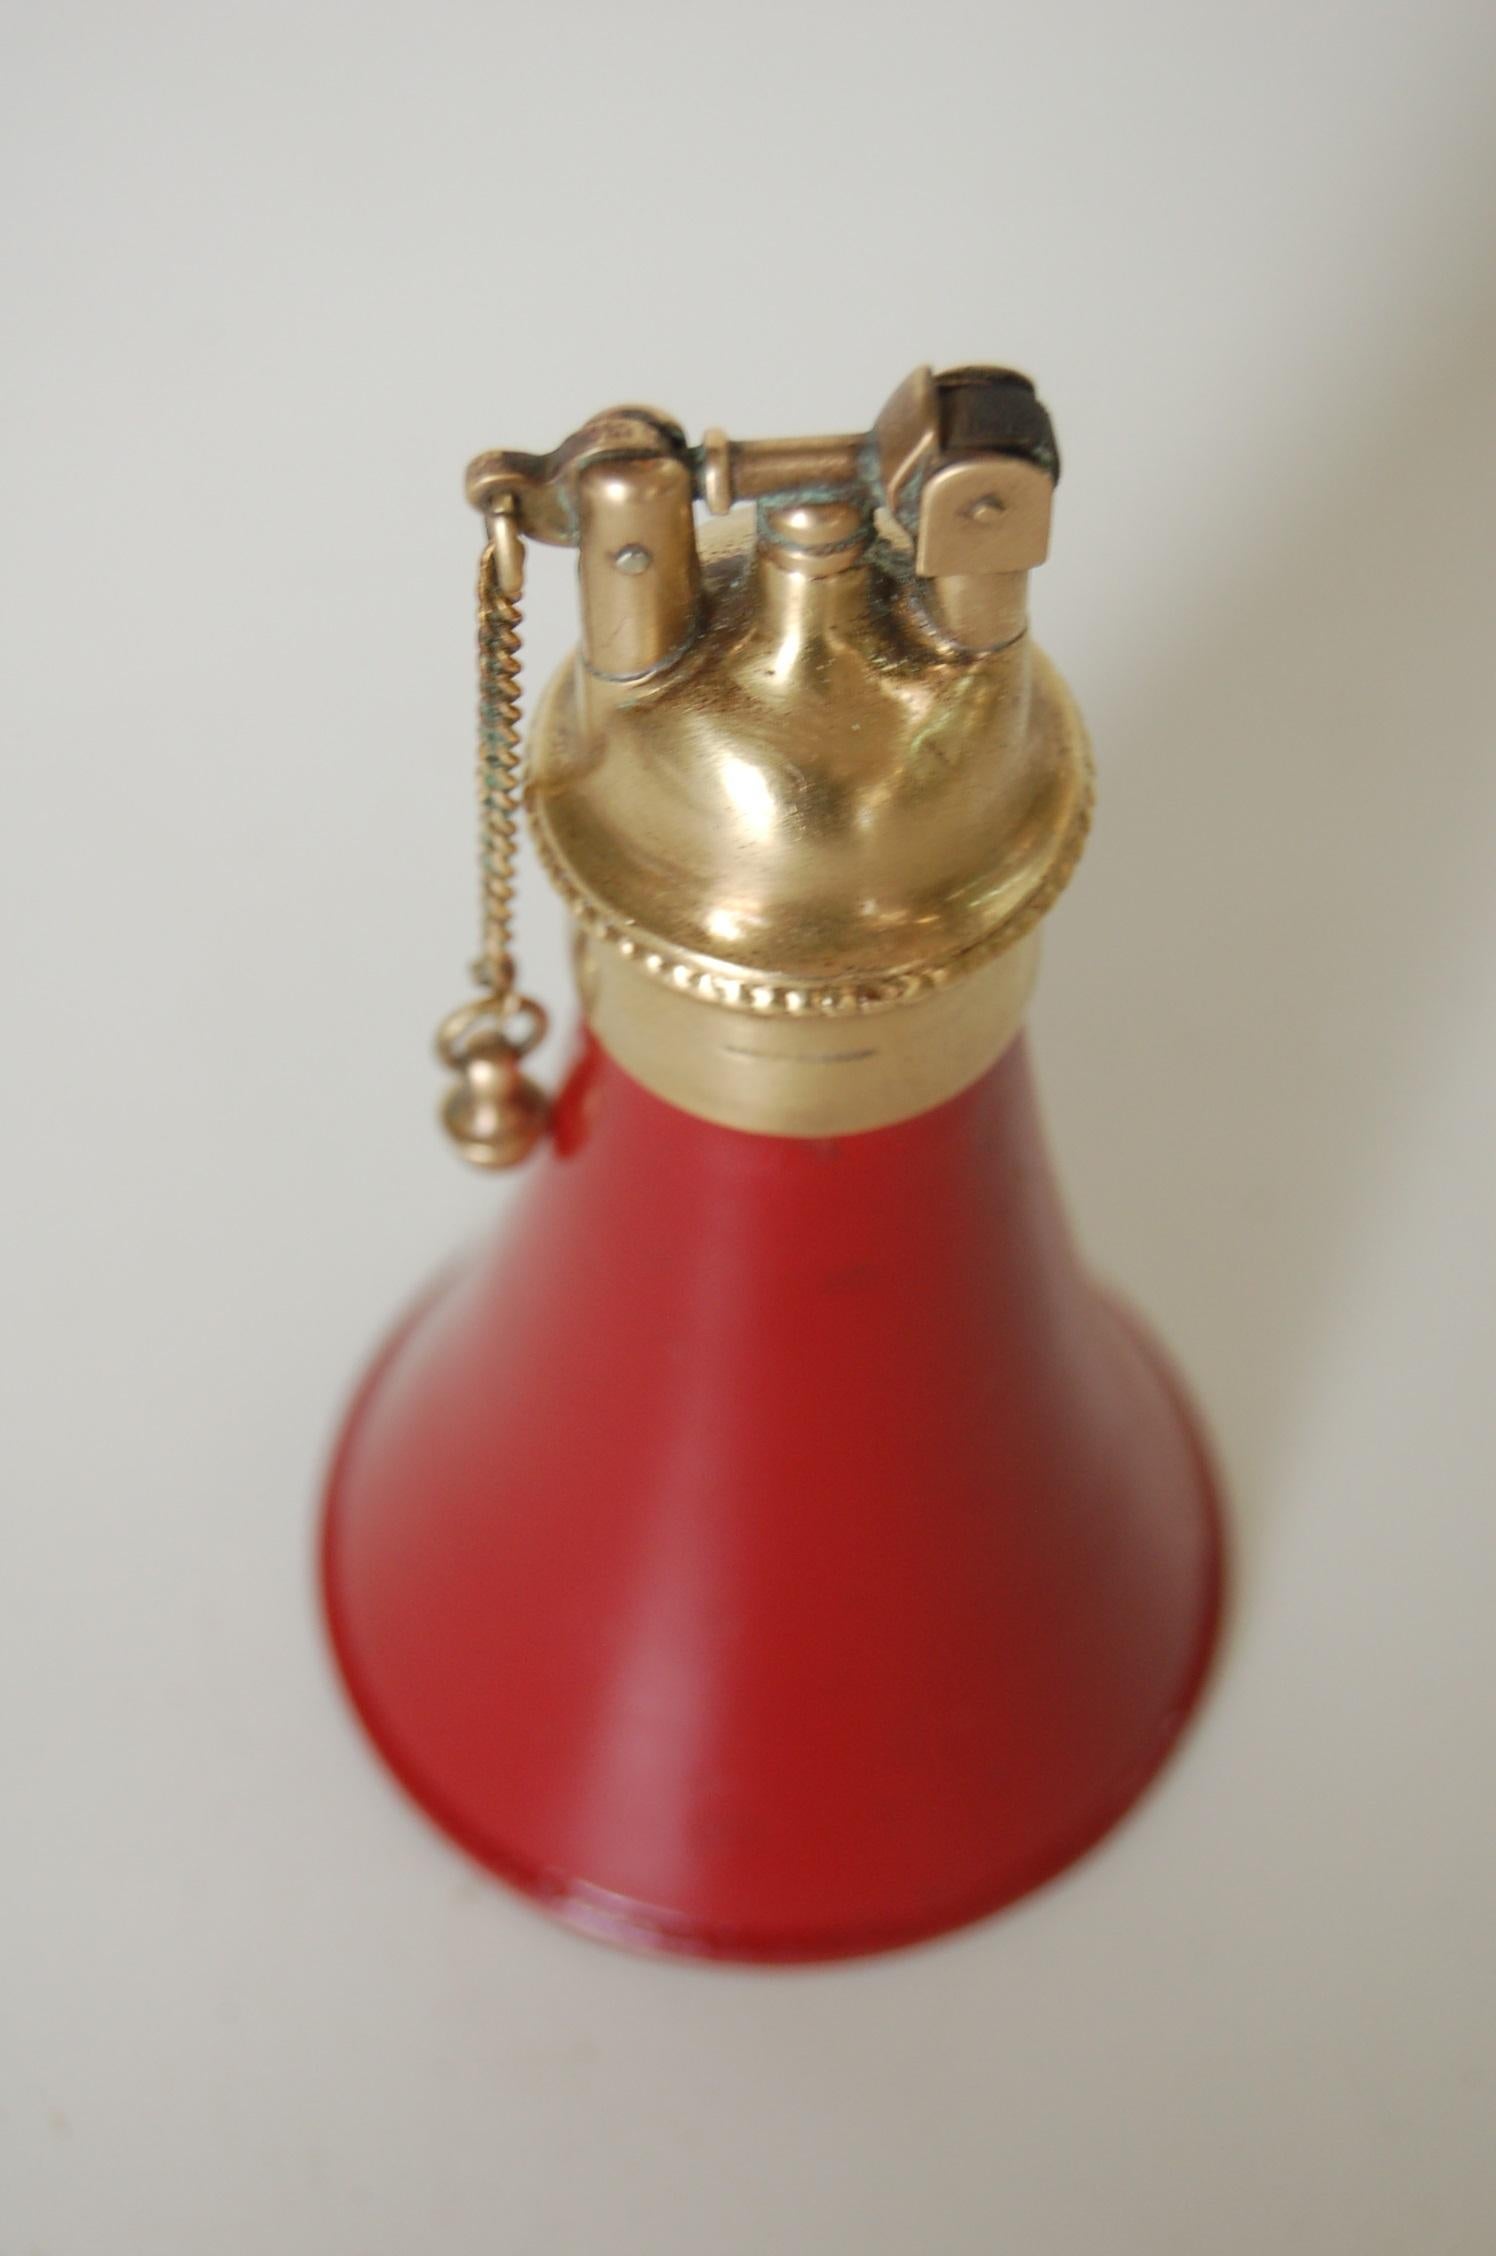 Brass and Red Horn Shaped DRP Petrol Table Pull Chain Lighter by Zunder In Excellent Condition For Sale In Van Nuys, CA